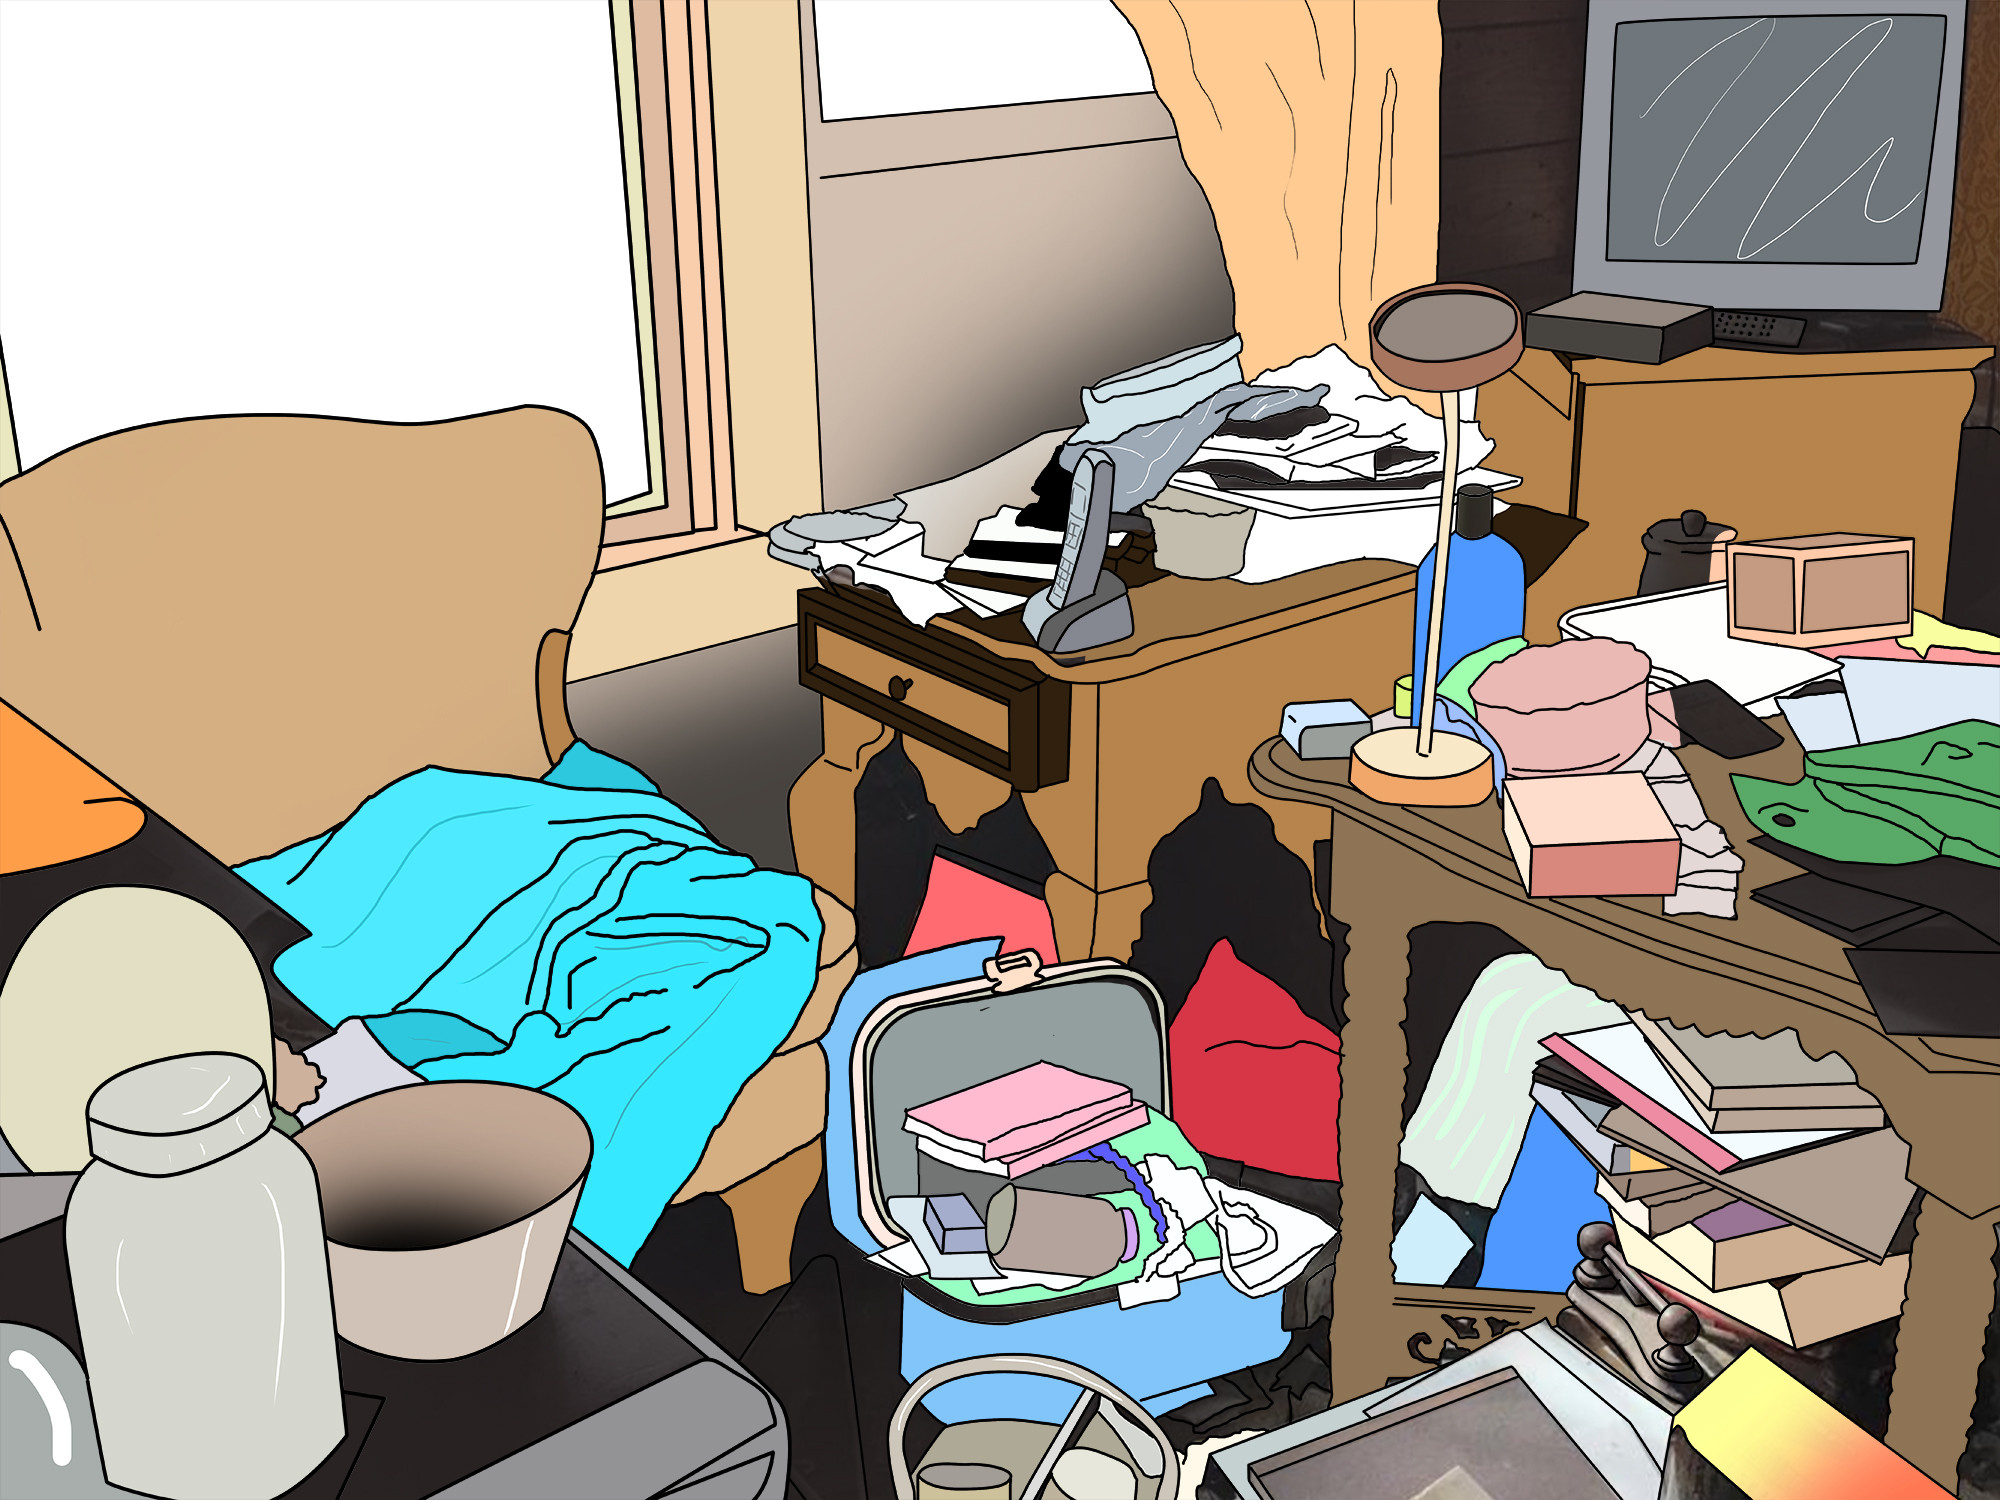 Emotional relationship with clutter/why some people find it so hard to throw things away